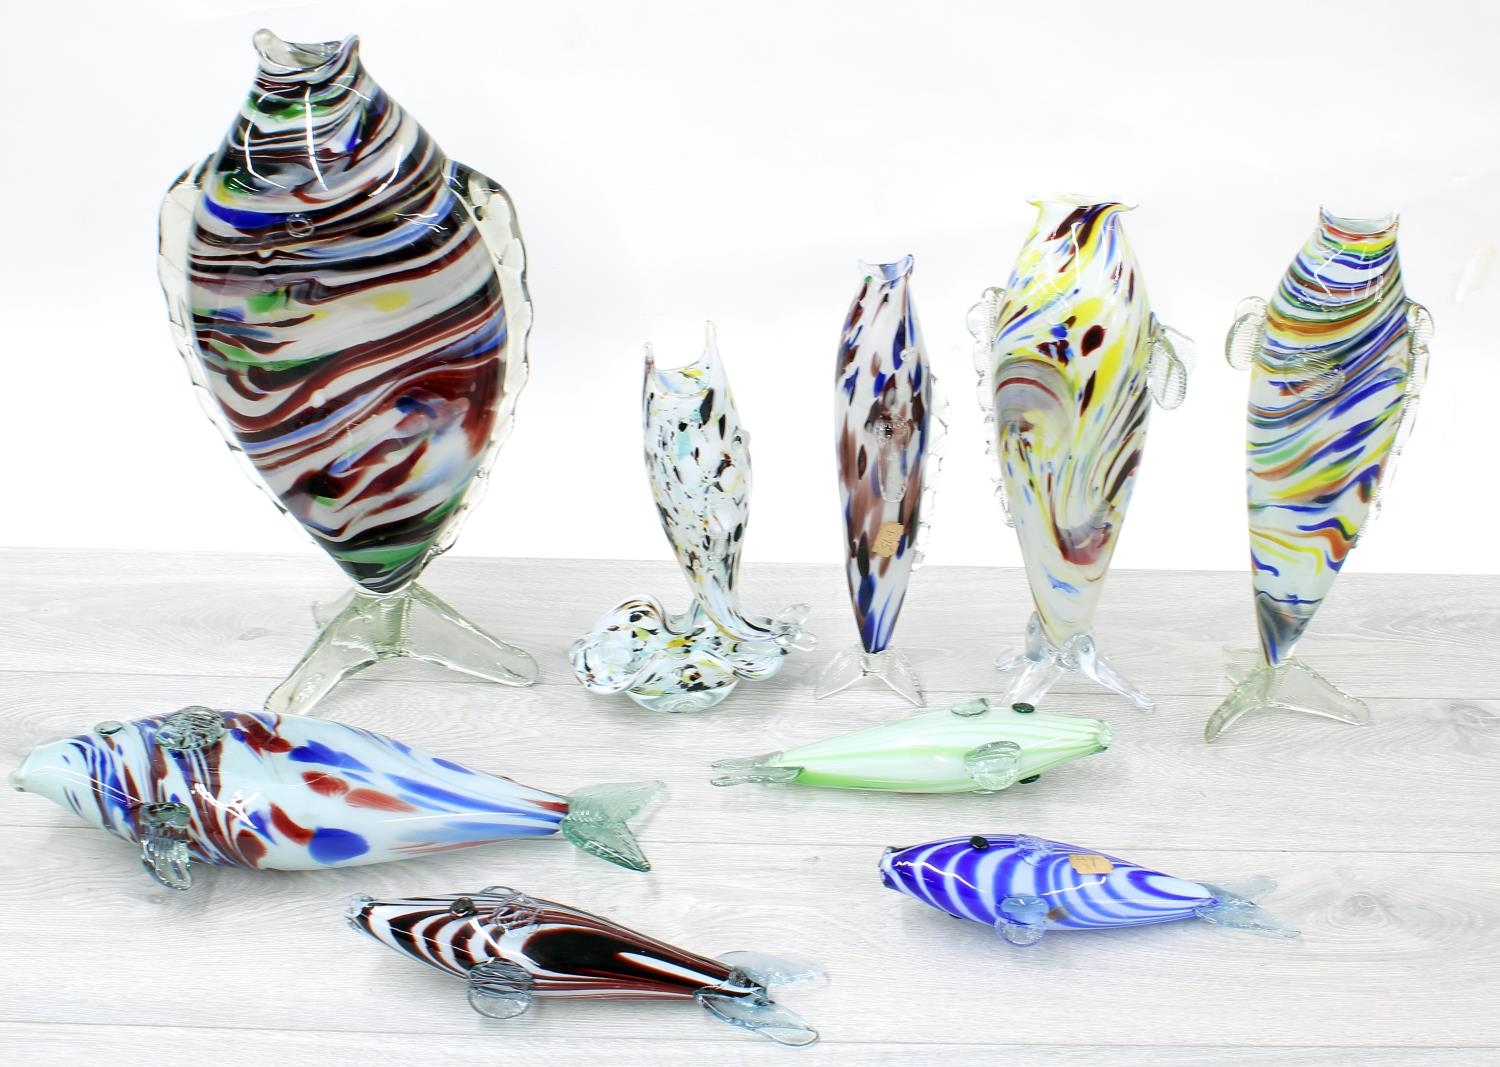 Collection of 'End of Day' mottled glass fish design vases and ornaments, the tallest vase 16"